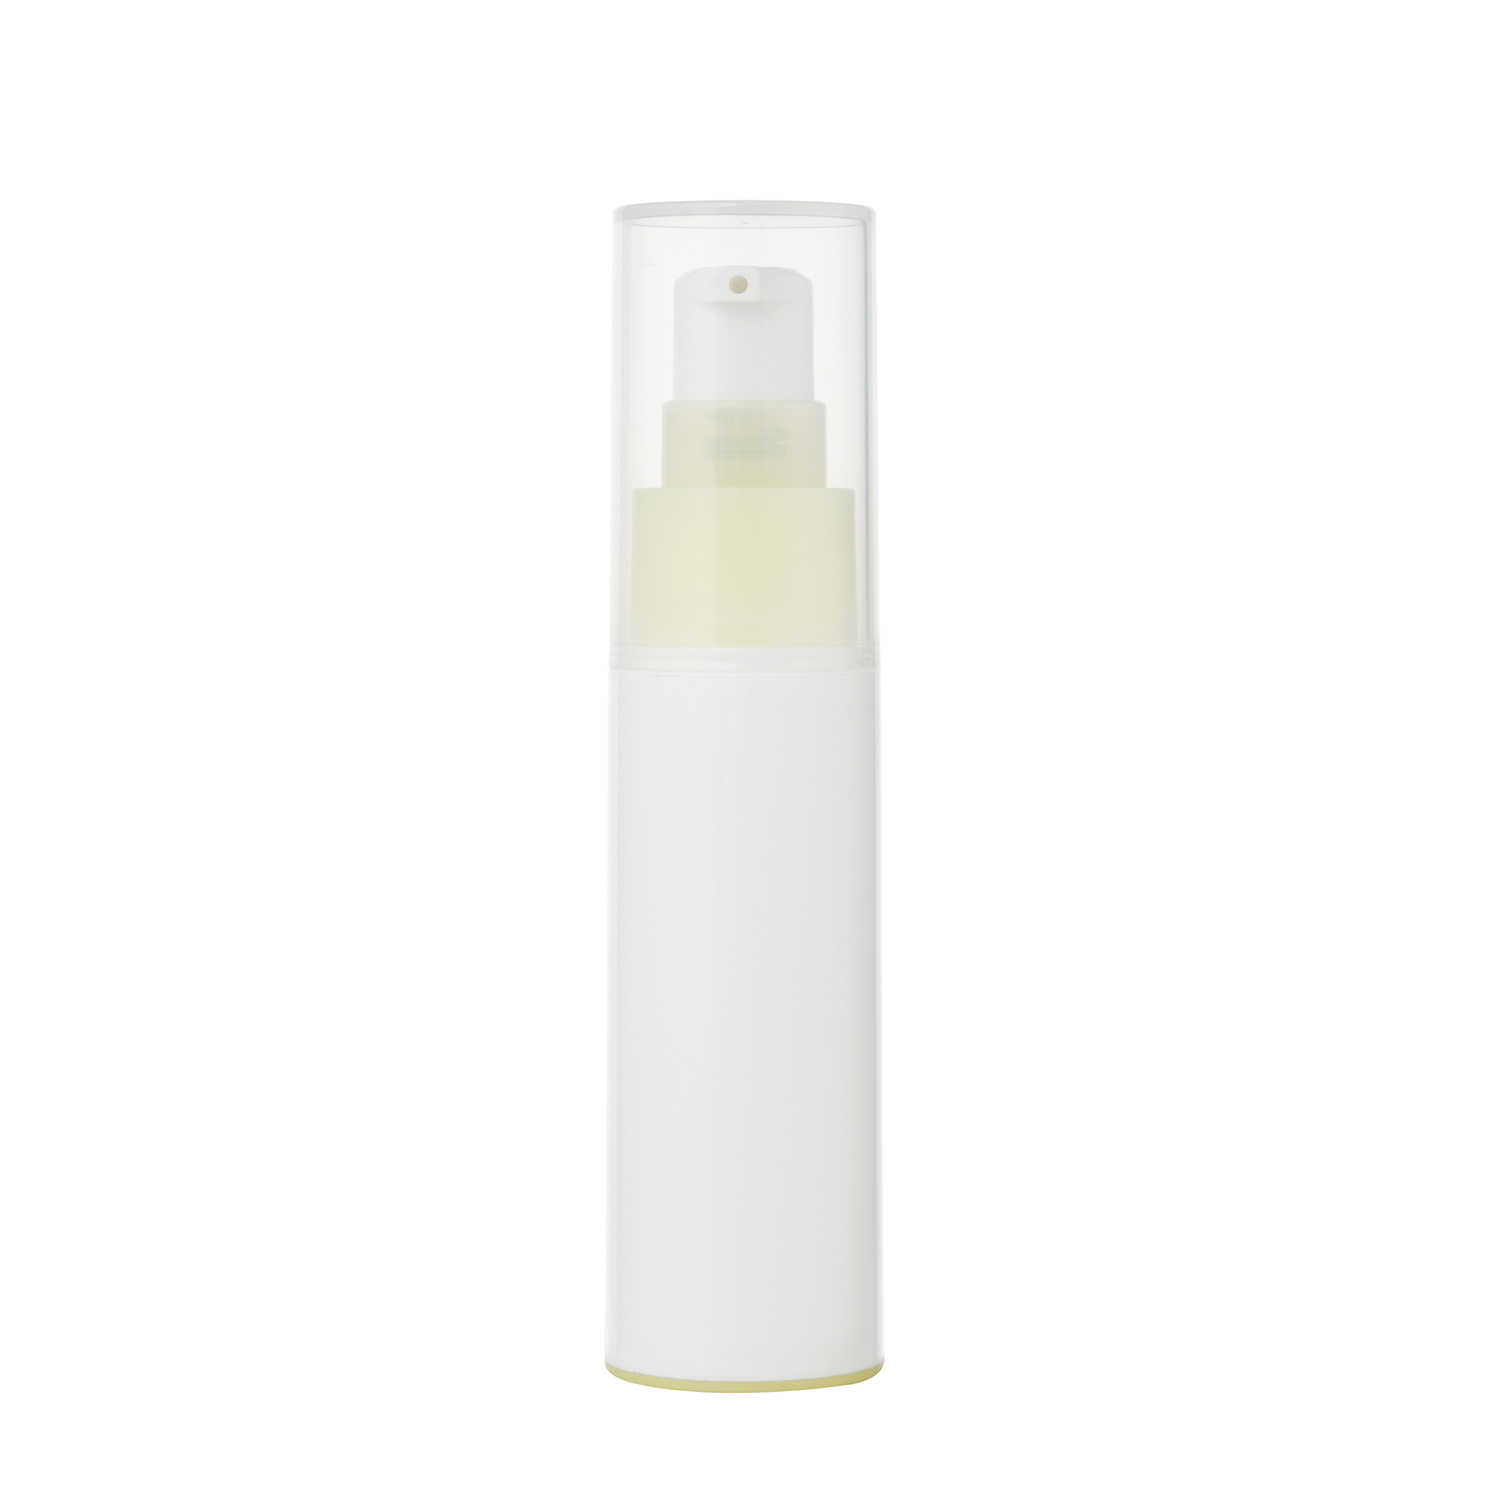 15ml 30ml 50ml Screw Cap PP（30%—100%PCR） Airless Cosmetic Bottles Wholesale Recycleable Airless Bottle Sustainable Cosmetic Packaging